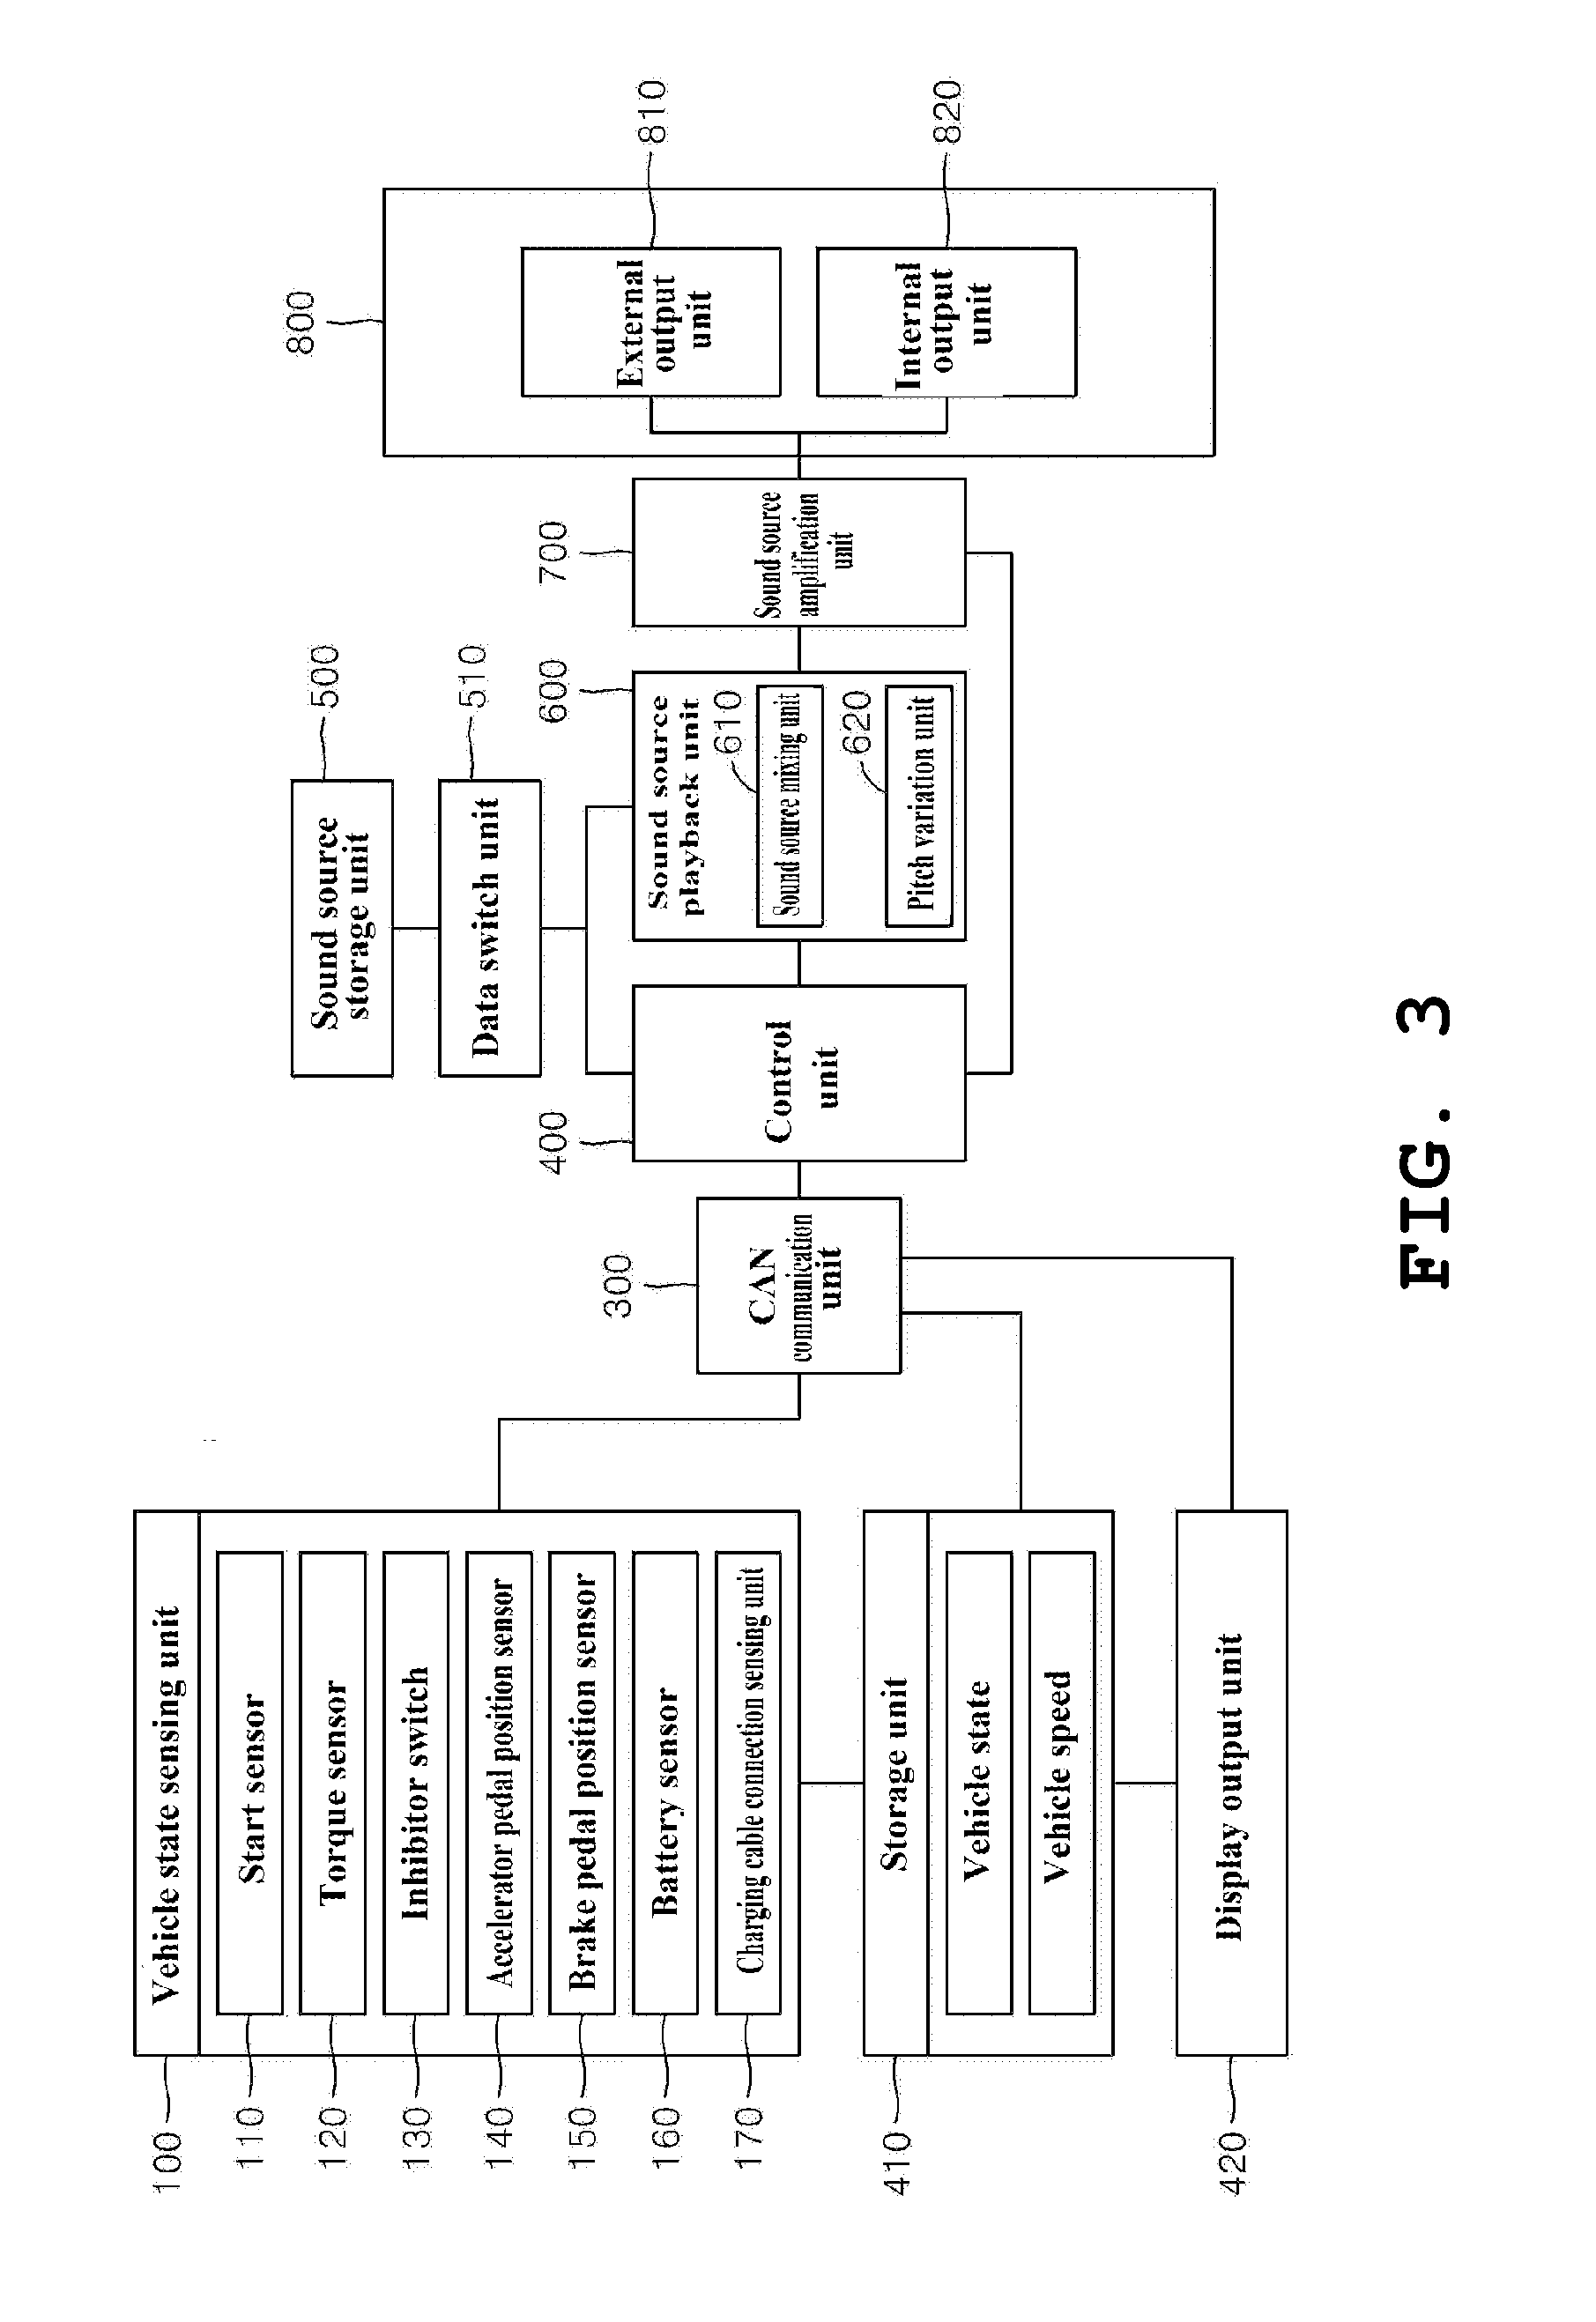 Sound generating system for environment friendly vehicle and a method for controlling the system